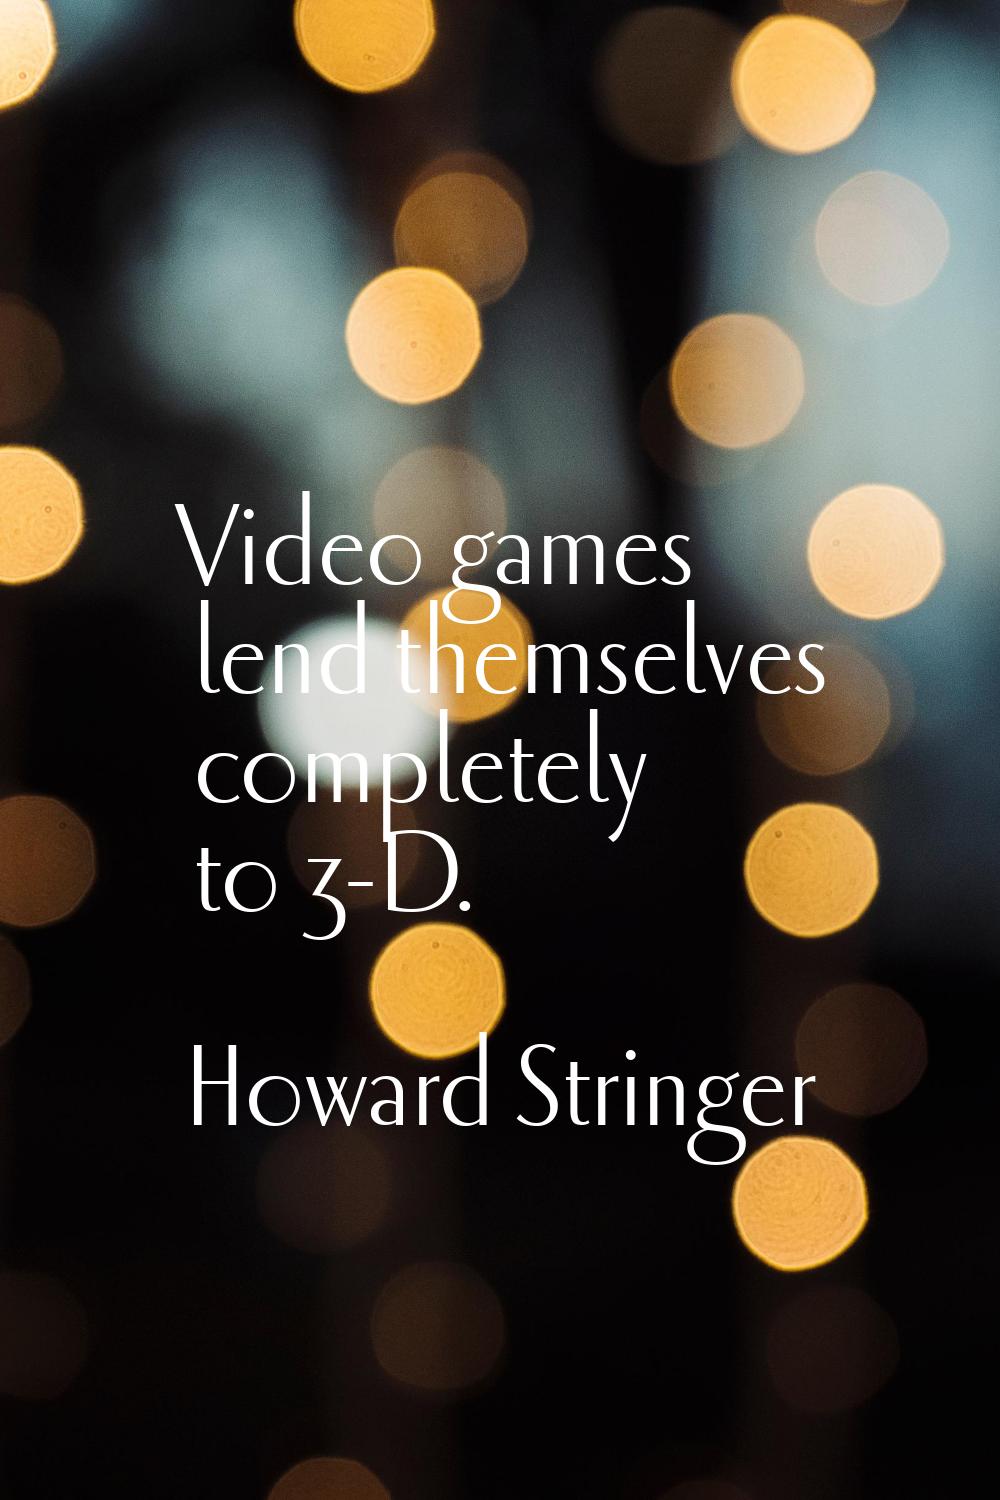 Video games lend themselves completely to 3-D.